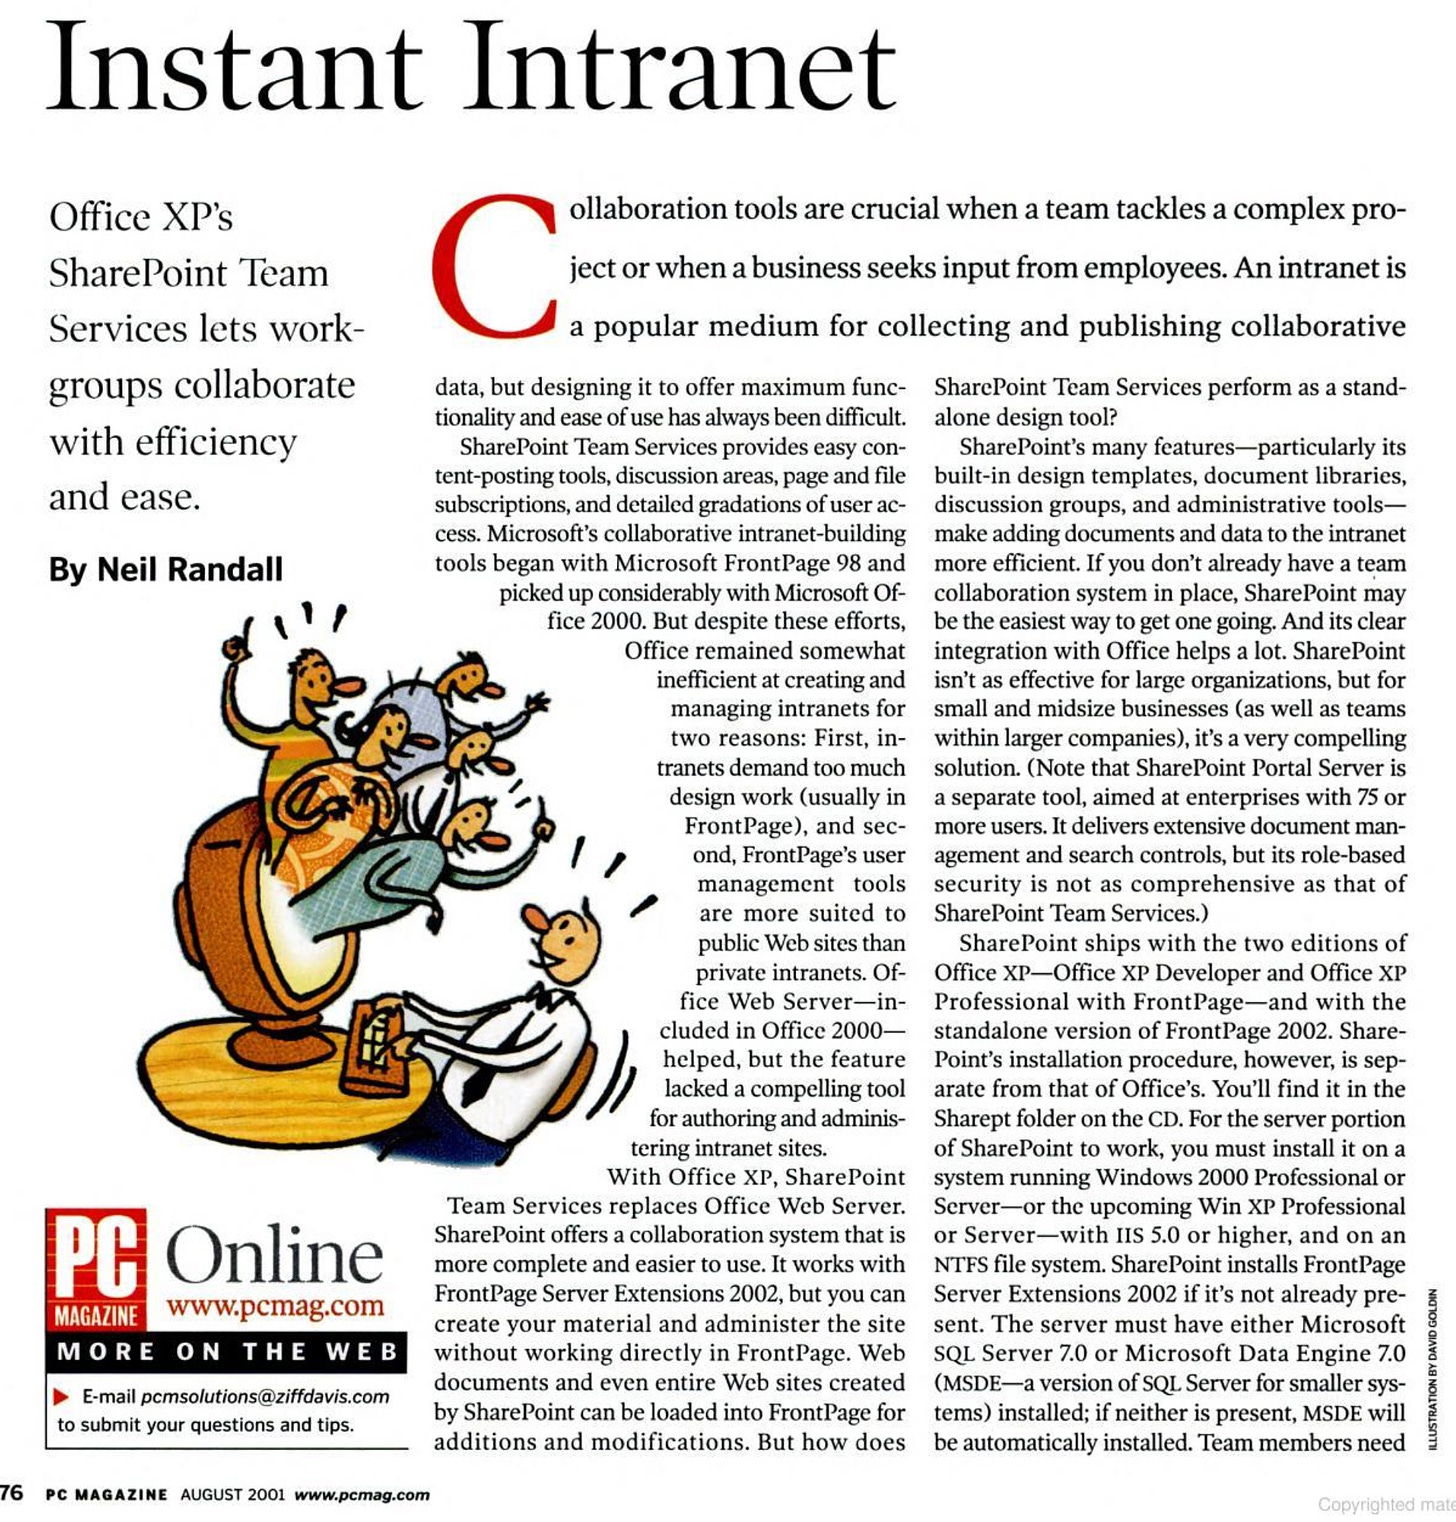 Instant Intranet Office XP's SharePoint Team Services lets work- groups collaborate with efficiency and ease. By Neil Randall PA Online MAGAZINE www.pcmag.com MORE ON THE WEB E-mail pcmsolutions@ziffdavis.com to submit your questions and tips. 76 PC MAGAZINE AUGUST 2001 www.pcmag.com ollaboration tools are crucial when a team tackles a complex pro- ject or when a business seeks input from employees. An intranet is a popular medium for collecting and publishing collaborative data, but designing it to offer maximum func- SharePoint Team Services perform as a stand- tonality and ease of use has always been difficult. alone design tool? SharePoint Team Services provides easy con- SharePoint's many features--particularly its tent-posting tools, discussion areas, page and file built-in design templates, document libraries, subscriptions, and detailed gradations of user ac- discussion groups, and administrative tools- cess. Microsoft's collaborative intranet-building make adding documents and data to the intranet tools began with Microsoft Frontage 98 and more efficient. If you don't already have a team picked up considerably with Microsoft Of- collaboration system in place, SharePoint may fice 2000. But despite these efforts, be the easiest way to get one going. And its clear Office remained somewhat integration with Office helps a lot. SharePoint inefficient at creating and isn't as effective for large organizations, but for managing intranets for small and midsize businesses (as well as teams two reasons: First, in- aliG within larger companies), it's a very compelling tranets demand too much solution. (Note that SharePoint Portal Server is design work (usually in a separate tool, aimed at enterprises with 75 or FrontPage), and sec- more users. It delivers extensive document man- ond. FrontPage's user agement and search controls, but its role-based management tools security is not as comprehensive as that of are more suited to SharePoint Team Services.) public Web sites than SharePoint ships with the two editions of private intranets. Of- Office XP-Office XP Developer and Office XP fice Web Server-in- Professional with FrontPage-and with the cluded in Officc 2000- standalone version of Frontage 2002. Share- helped, but the feature Point's installation procedure, however, is sep- lacked a compelling tool arate from that of Office's. You'll find it in the for authoring and adminis- Sharept folder on the CD. For the server portion tering intranet sites. of SharePoint to work, you must install it on a With Office XP, SharePoint system running Windows 2000 Professional or Team Services replaces Office Web Server. Server--or the upcoming Win XP Professional SharePoint offers a collaboration system that is or Server-with IIS 5.0 or higher, and on an more complete and easier to use. It works with NTFS file system. SharePoint installs FrontPage Frontage Server Extensions 2002, but you can Server Extensions 2002 if it's not already pre- create your material and administer the site sent. The server must have either Microsoft without working directly in FrontPage. Web SQL Server 7.0 or Microsoft Data Engine 7.0 documents and even entire Web sites created (MSDE-a version of SQL Server for smaller sys- by SharePoint can be loaded into Frontage for tems) installed; if neither is present, MSDE will additions and modifications. But how does be automatically installed. Team members need